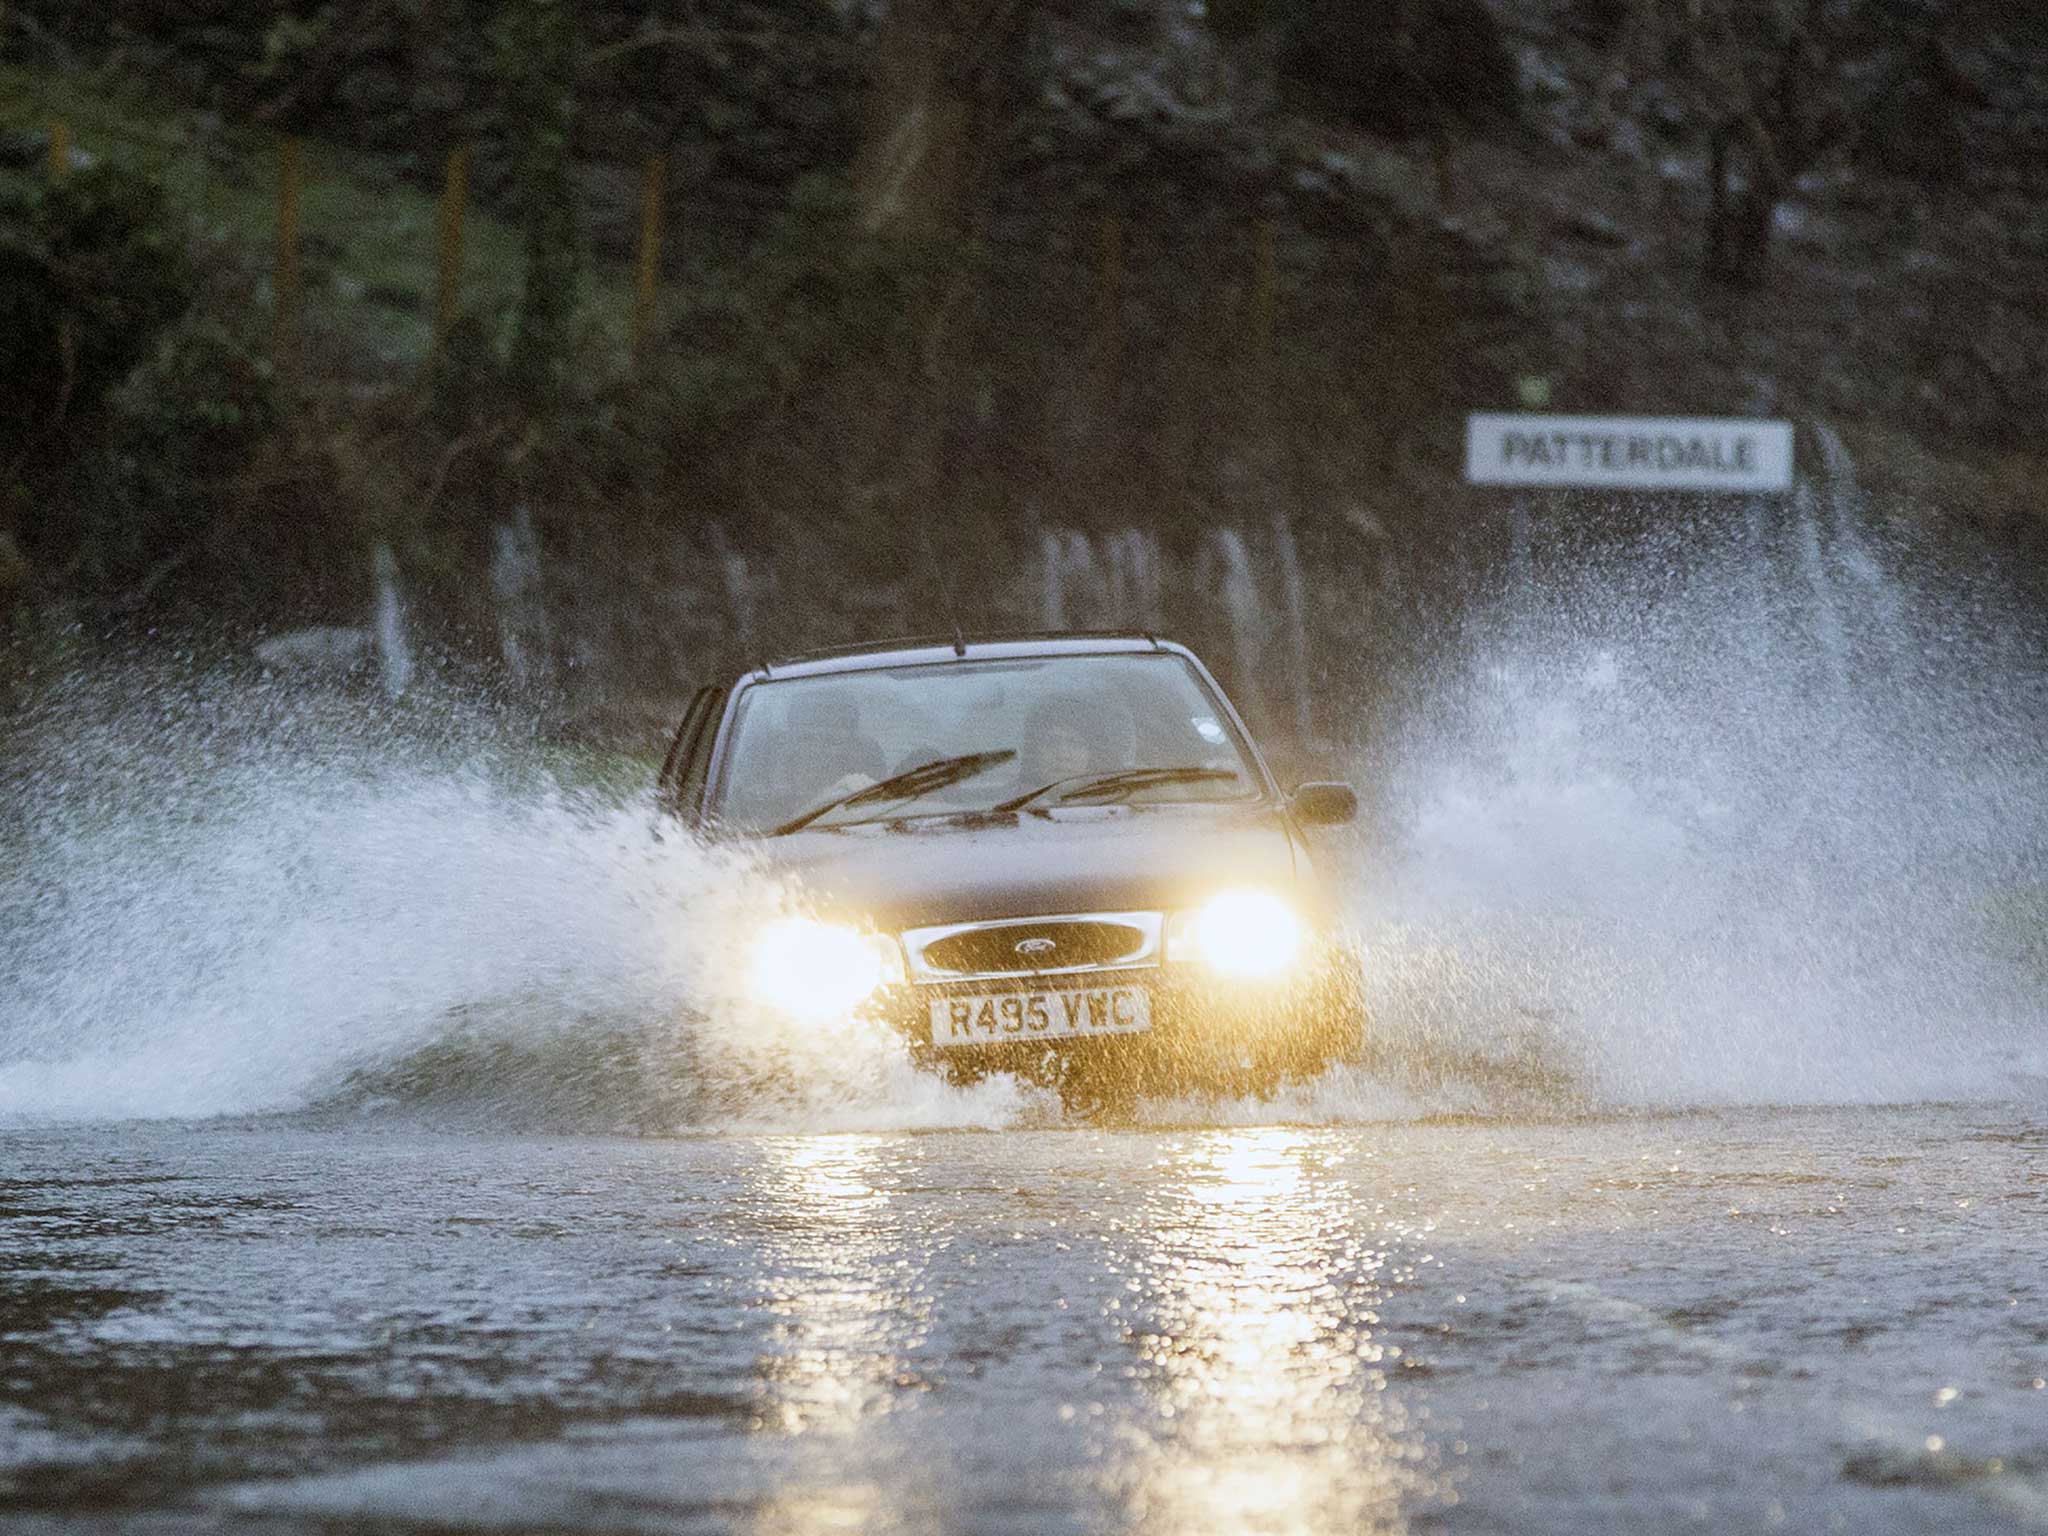 A car battles through flooded roads in Patterdale